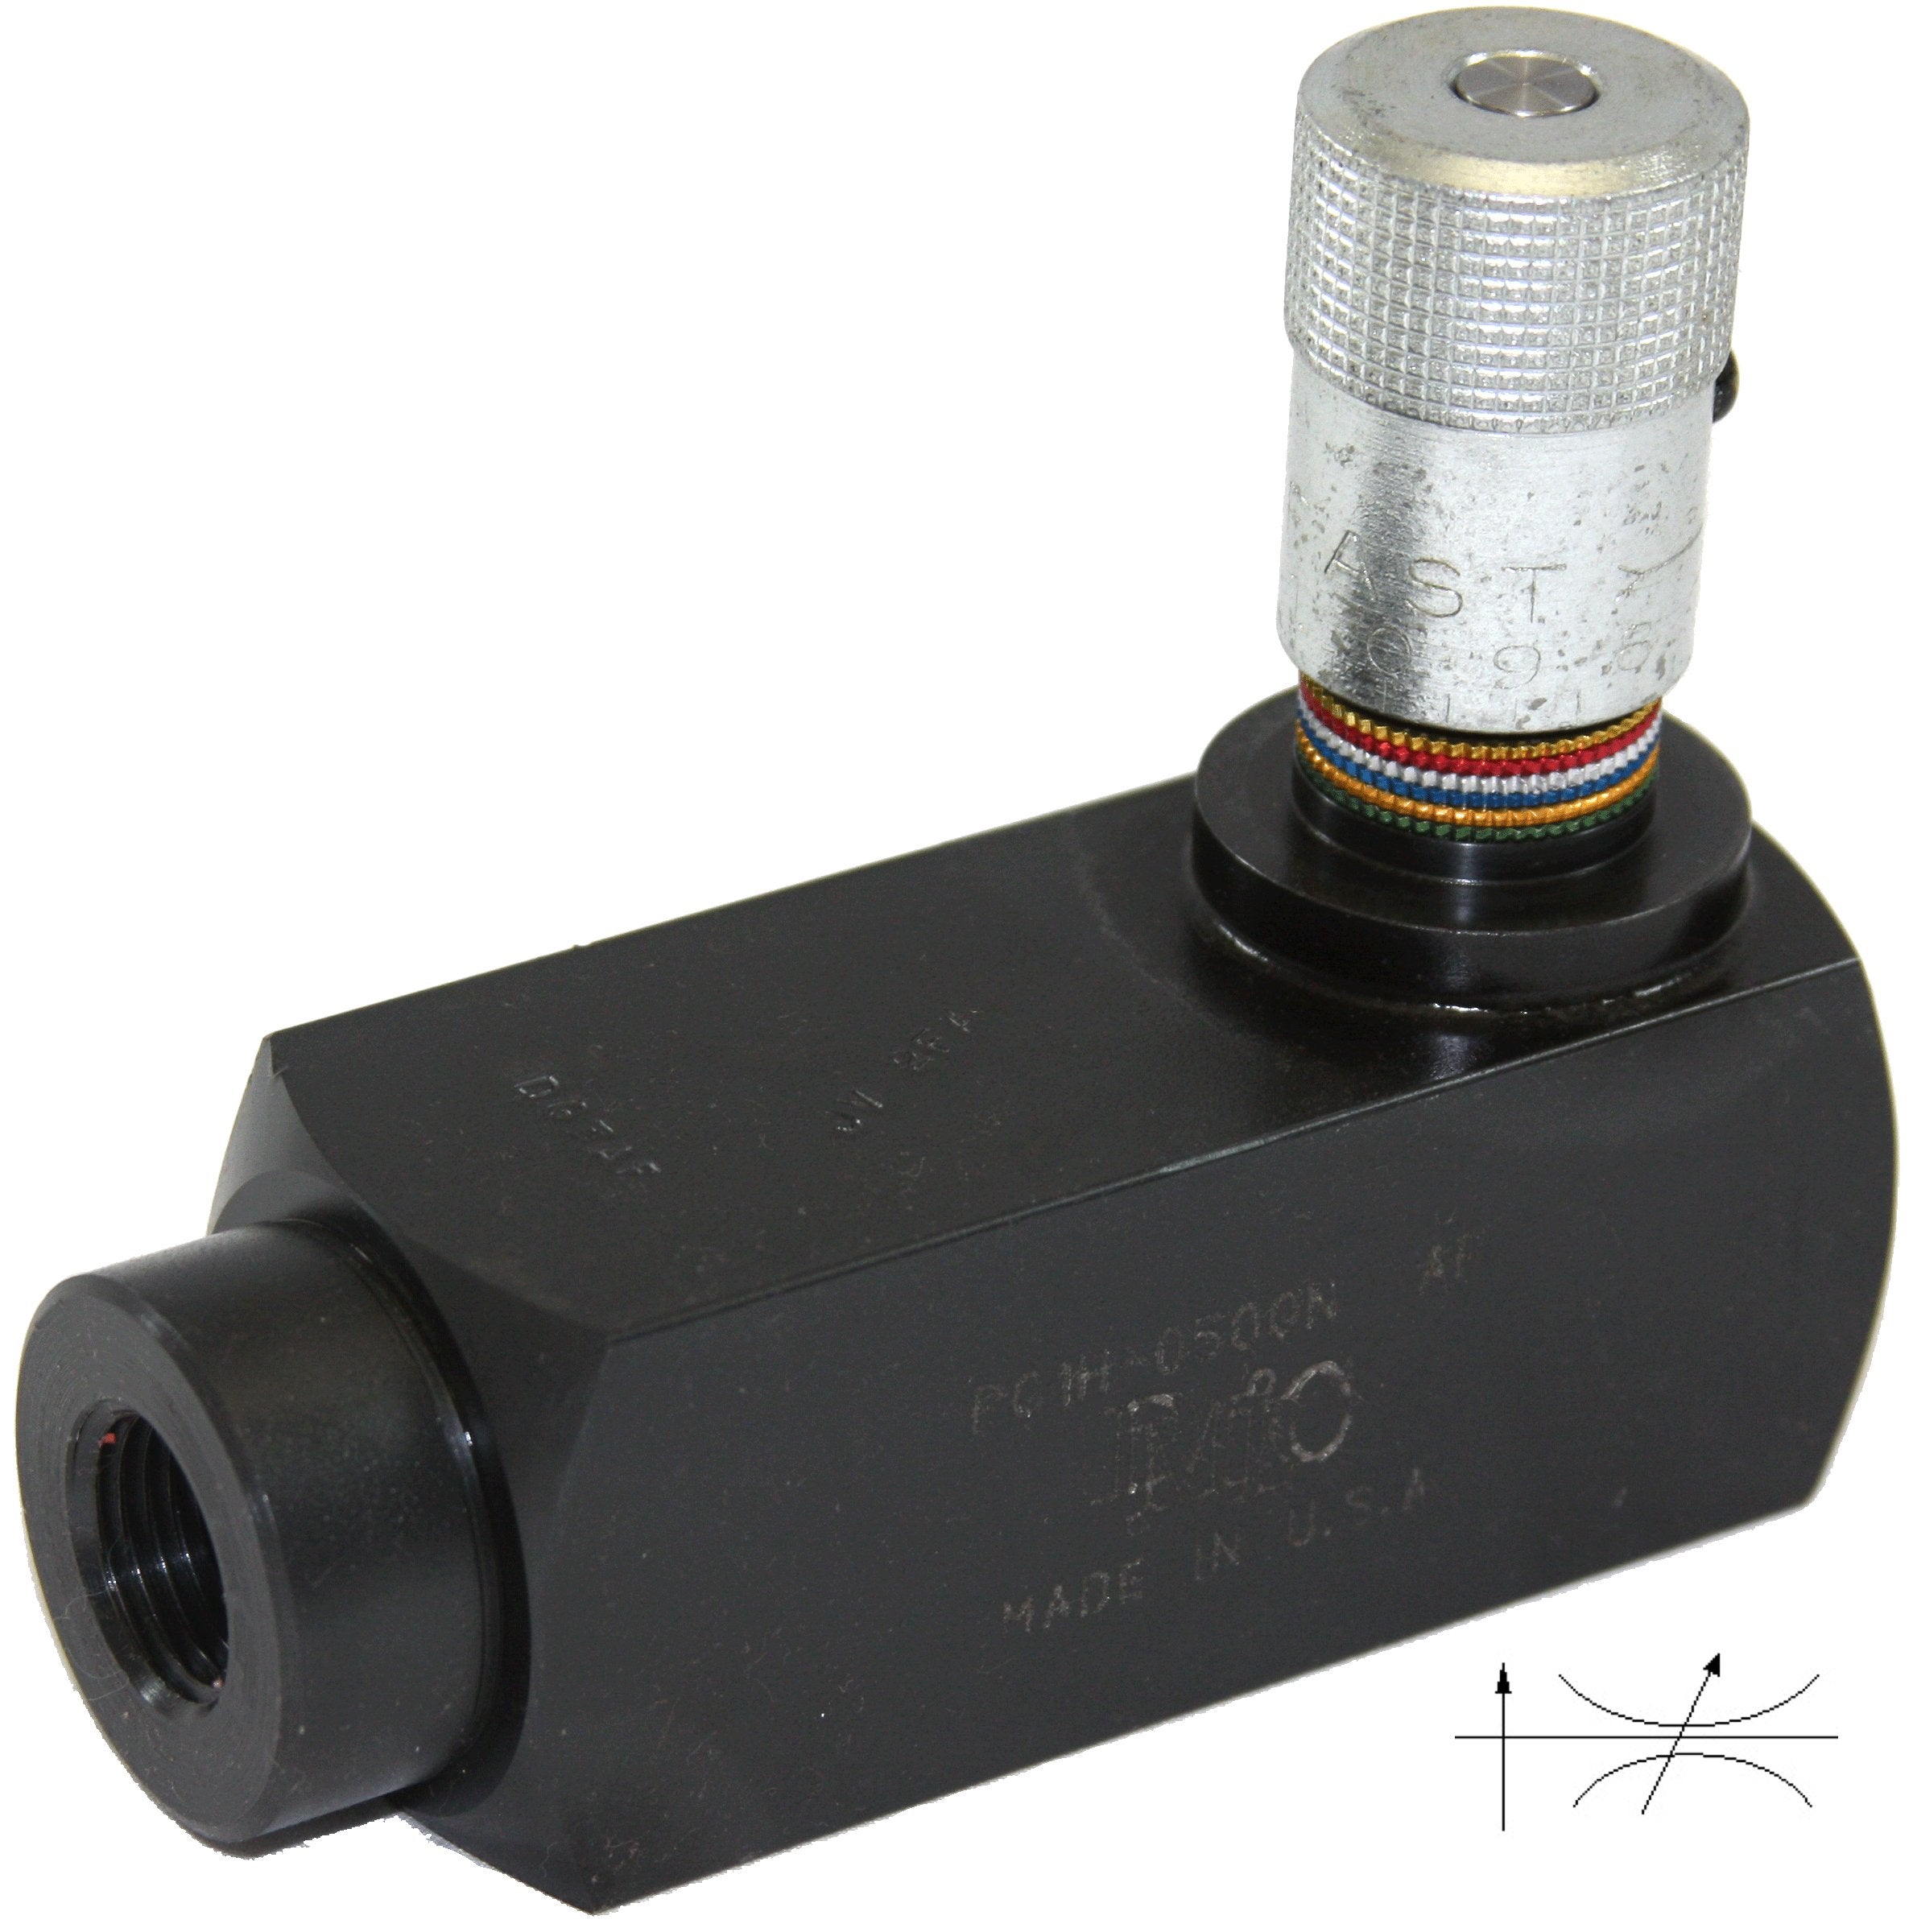 PC1H-0375N : DMIC Pressure Comp Flow Control, Unidirectional, Metered, with Check, 3/8" NPT, 3000psi, Carbon Steel